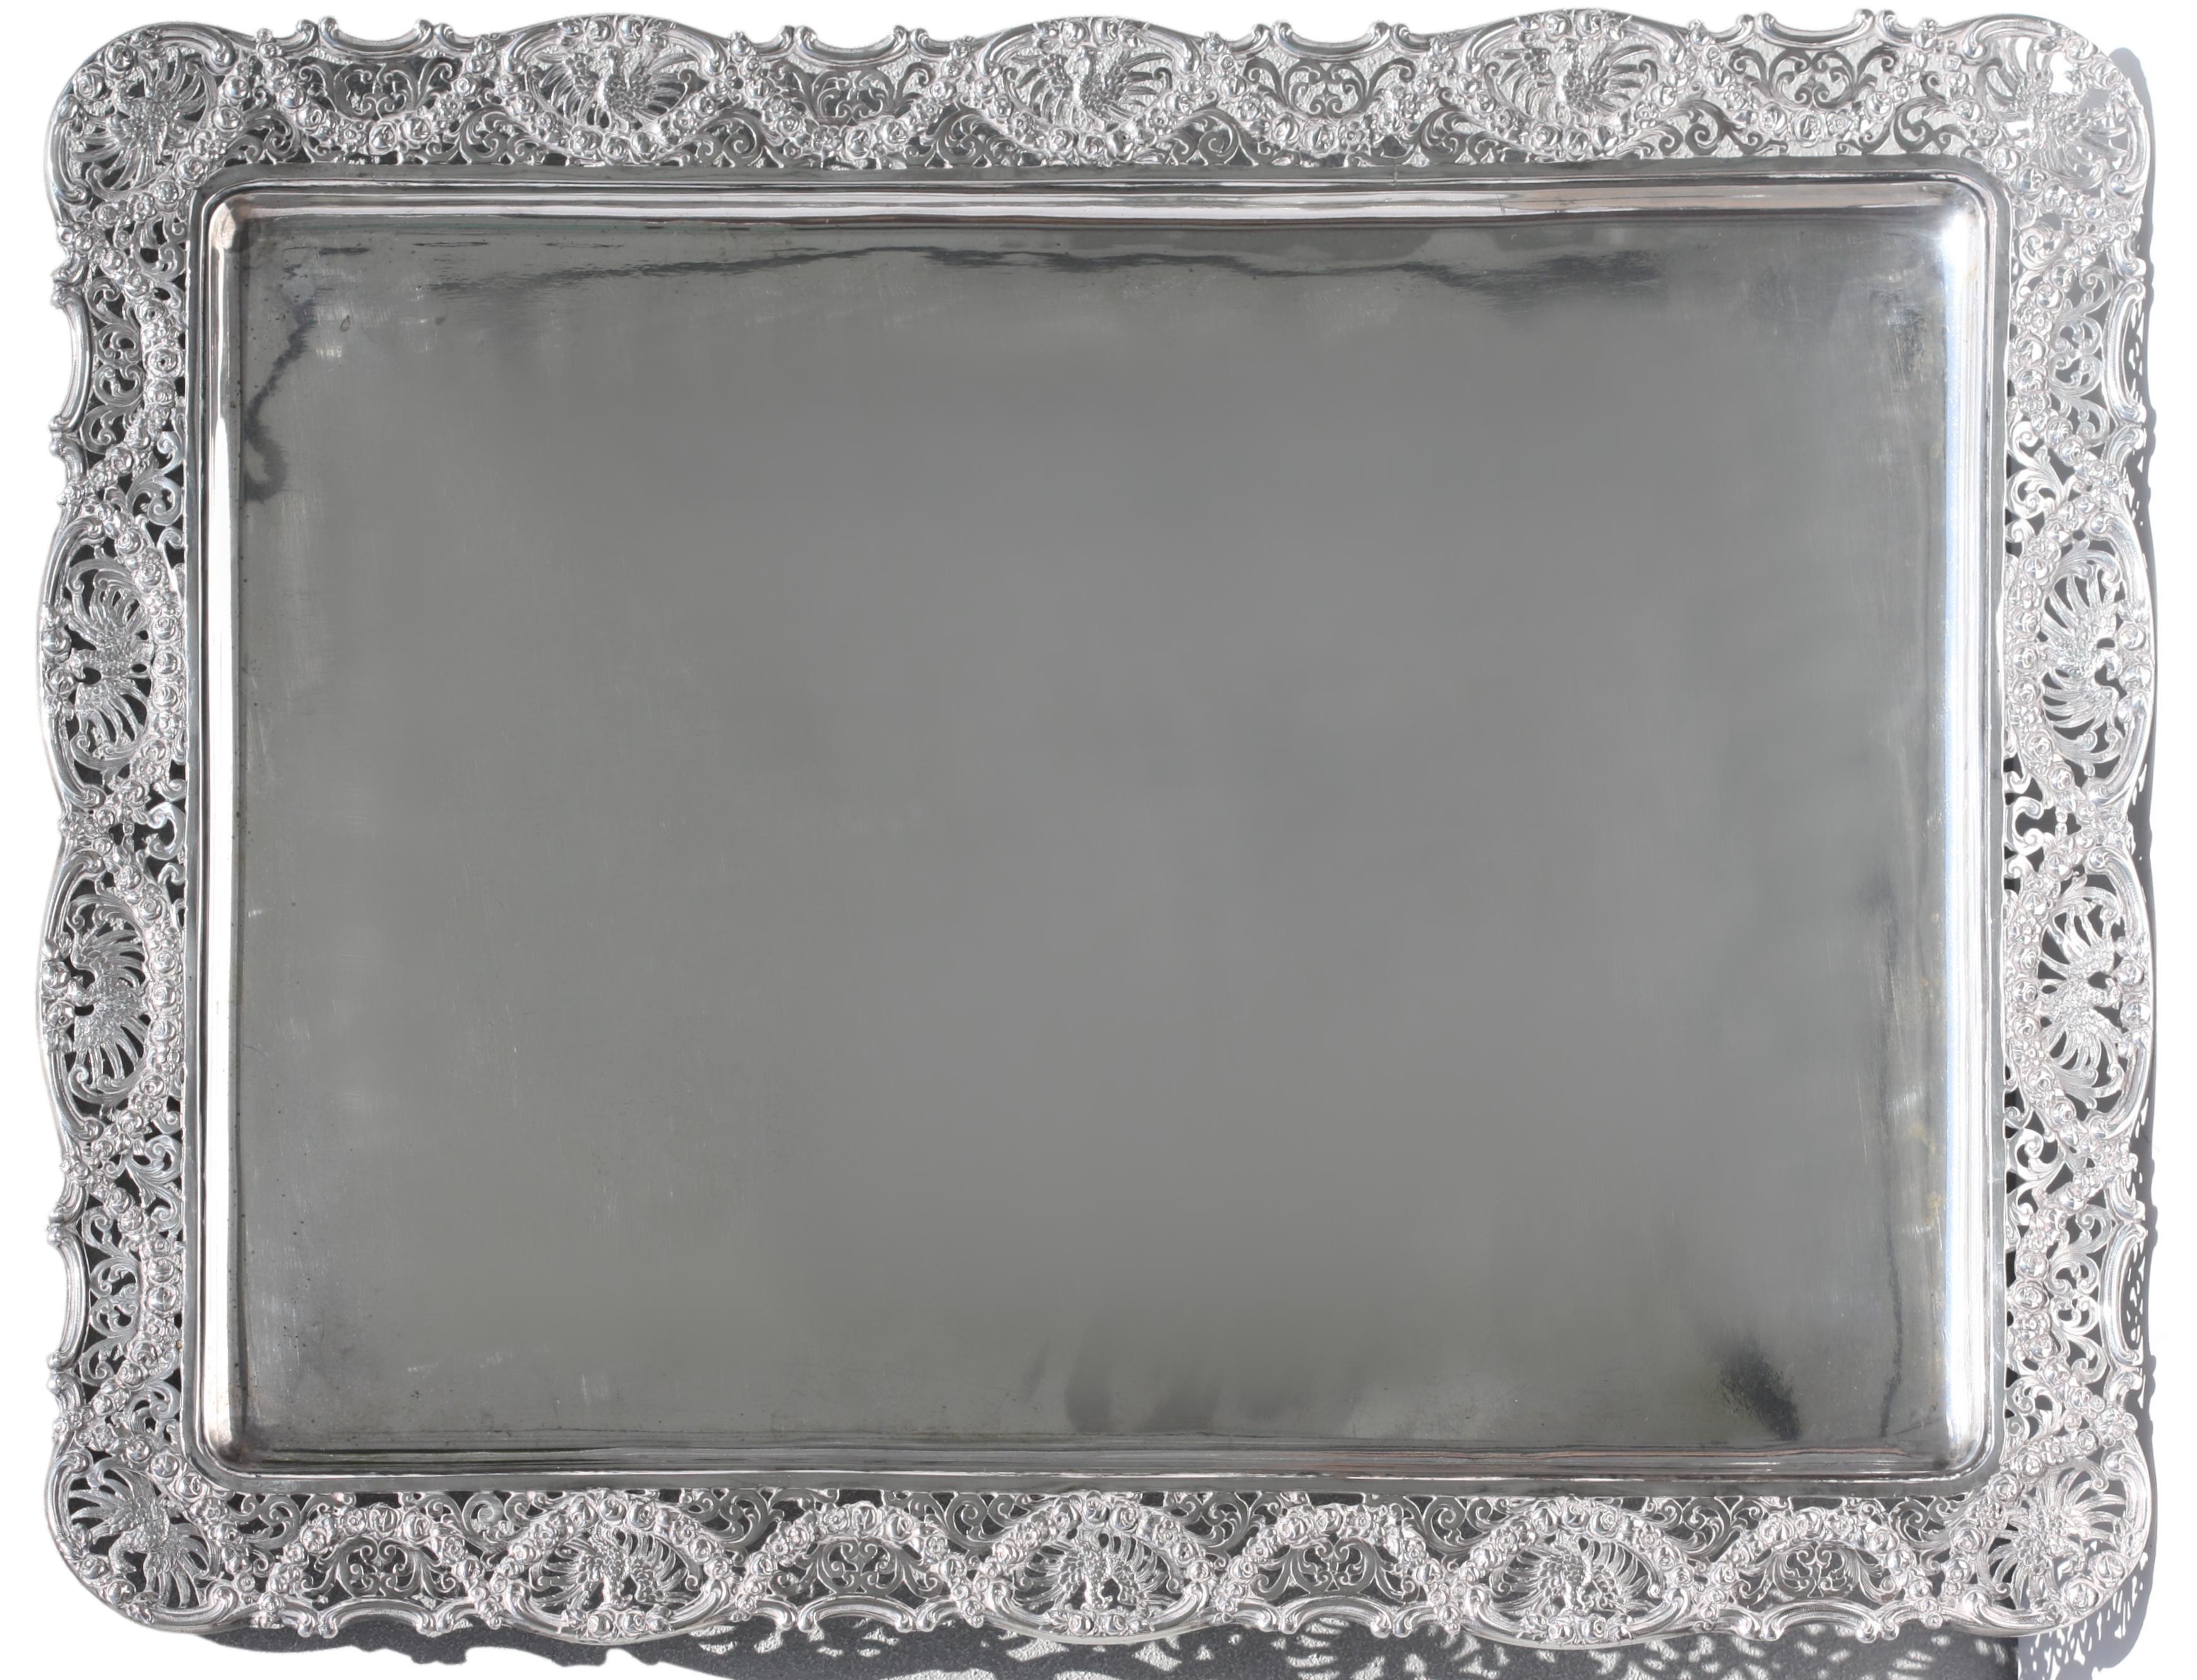 Continental Silver Rectangular Tray, Probably German For Sale 3